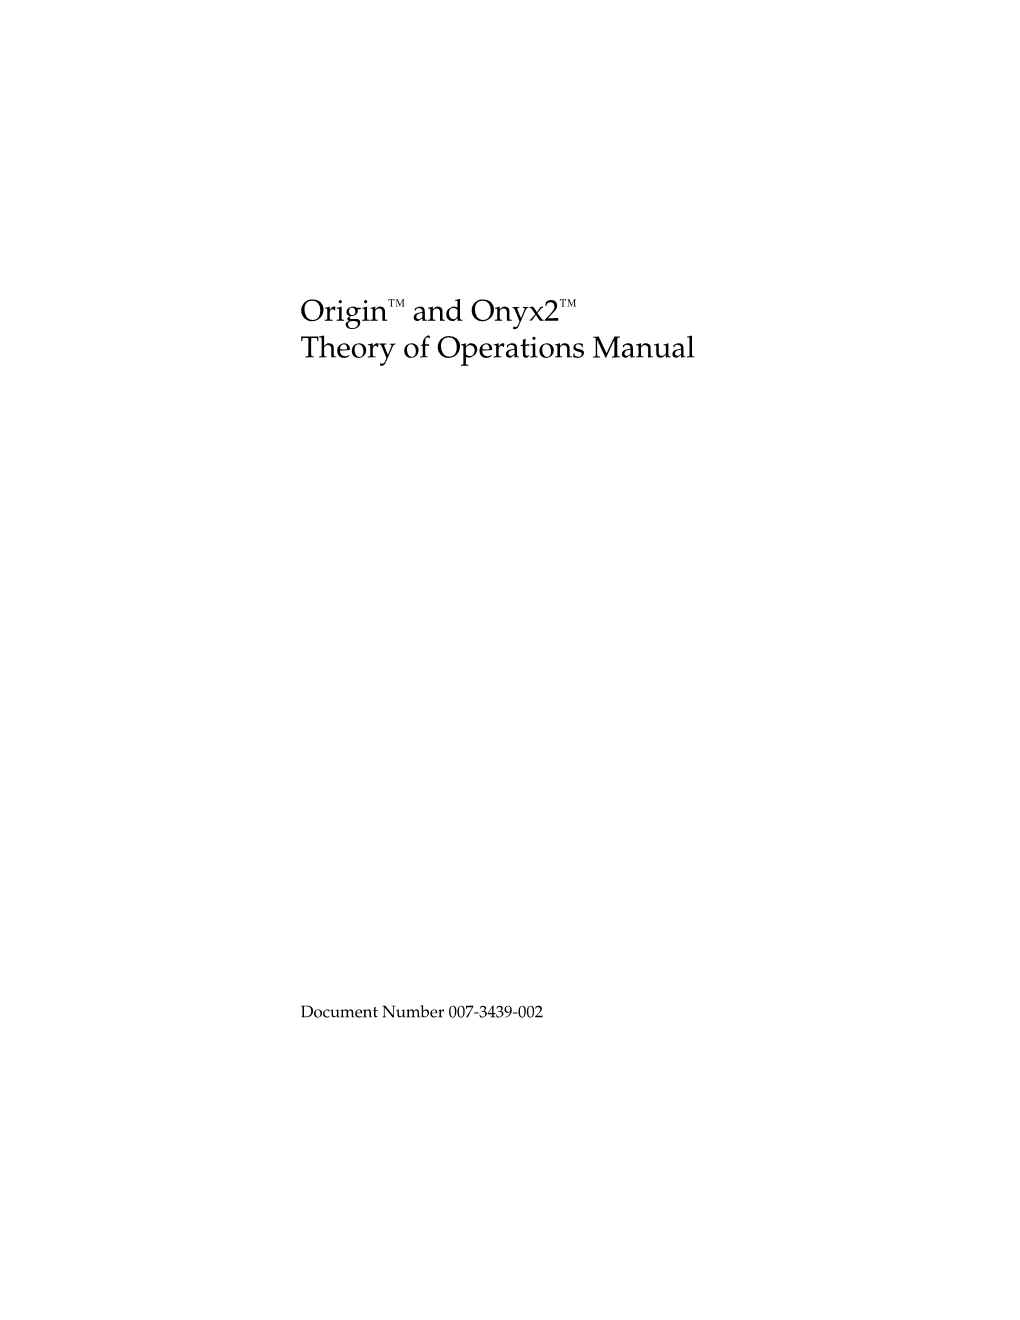 Origin™ and Onyx2™ Theory of Operations Manual